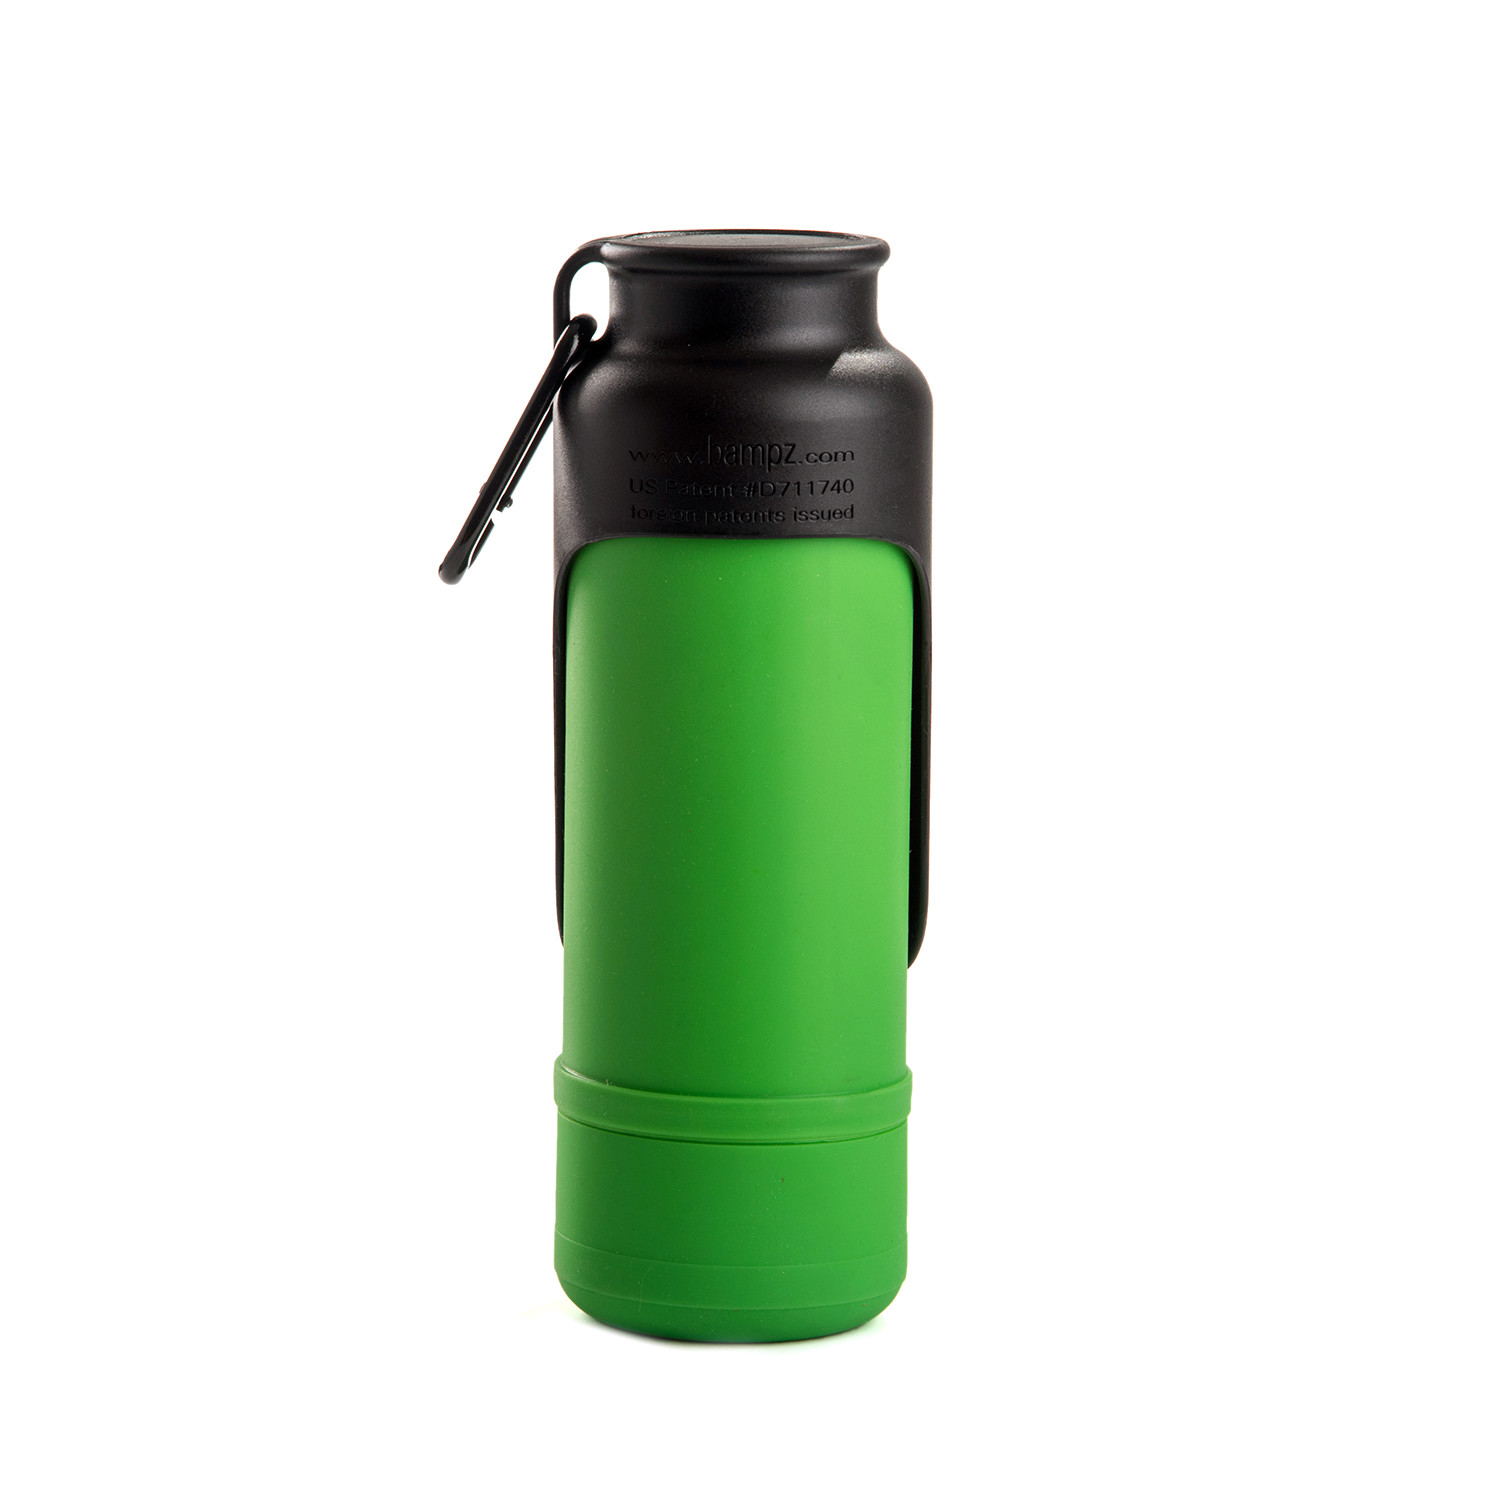 KONG Insulated Stainless Steel Dog Water Bottle // Green - Doggear ...